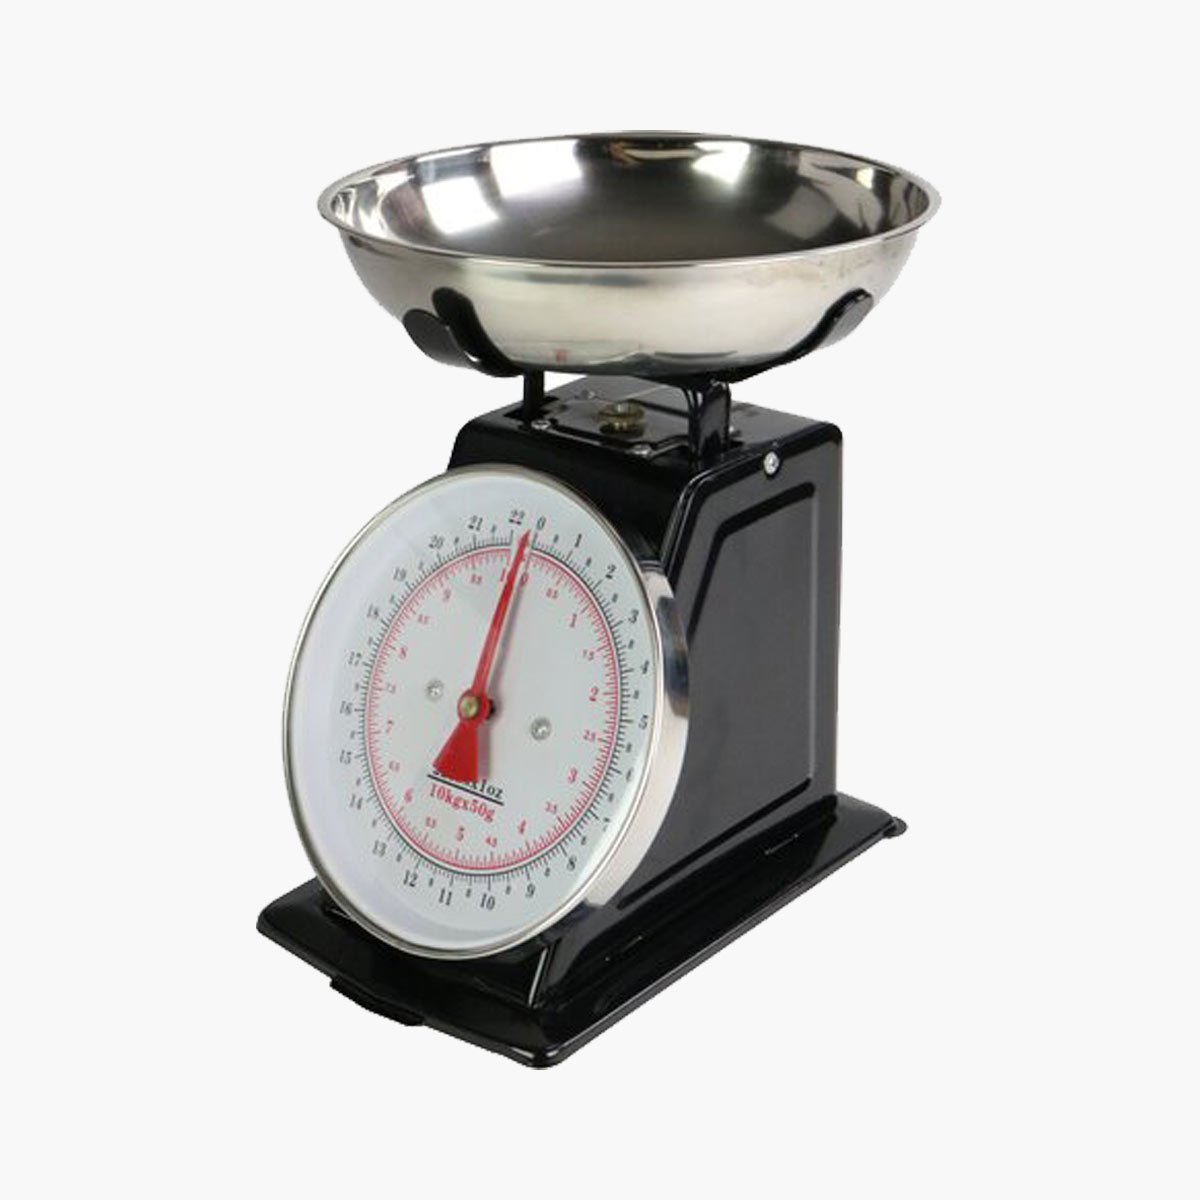 A vintage Cookinex mechanical kitchen scale.